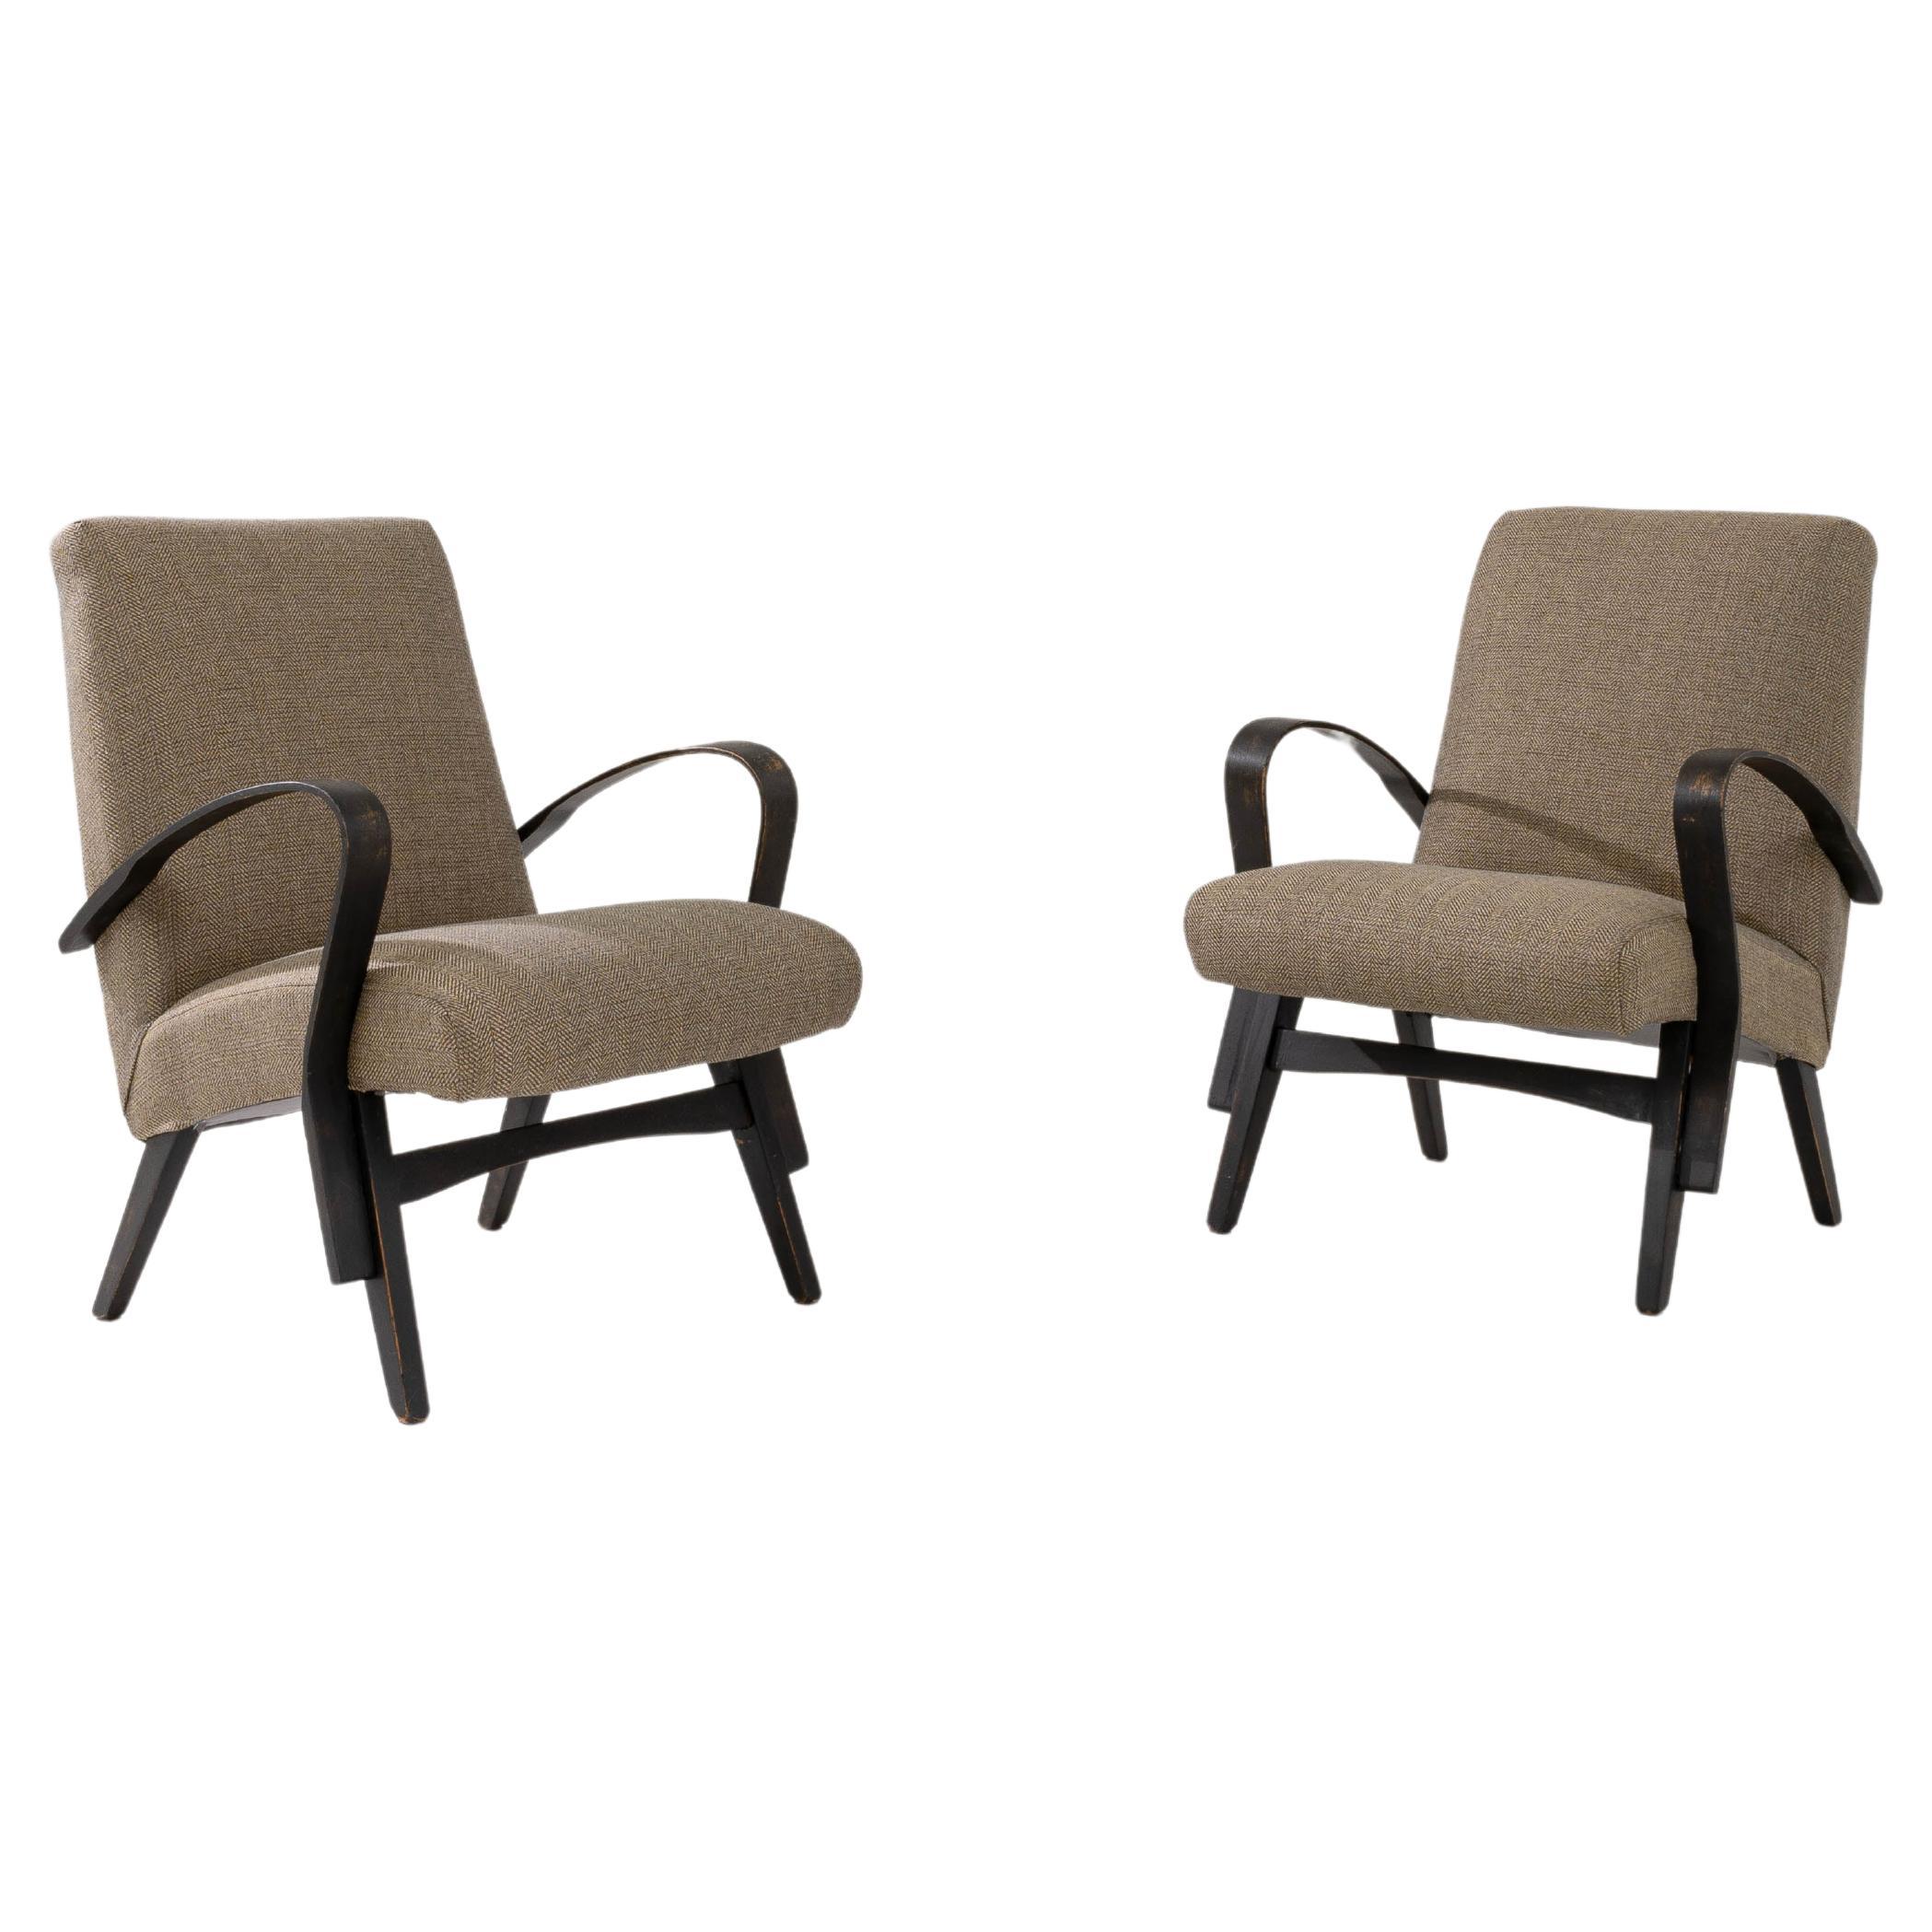 Vintage Czech Armchairs by Tatra, A Pair For Sale